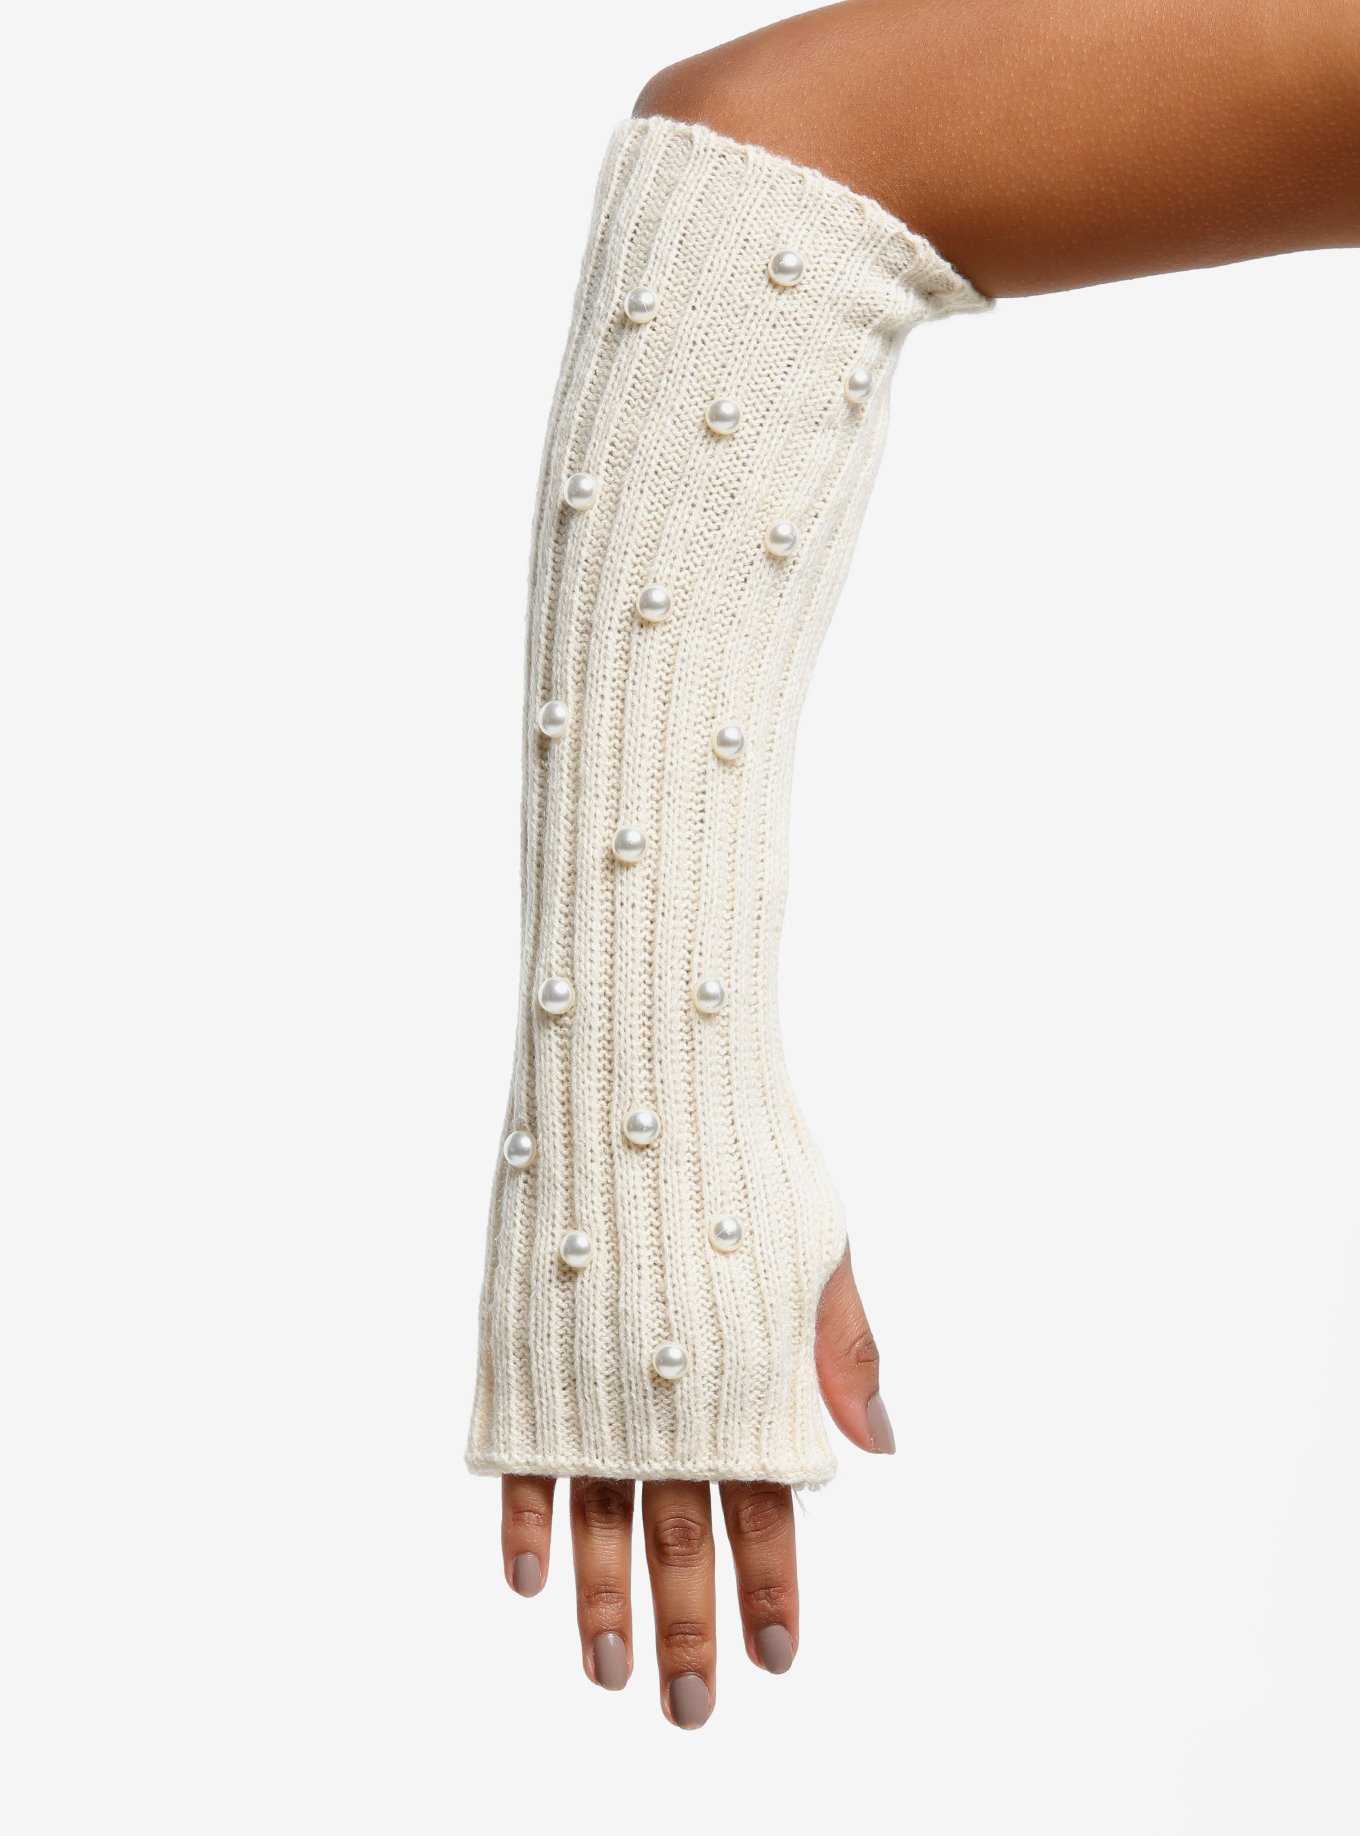 Cream Knit Pearl Beaded Arm Warmers, , hi-res